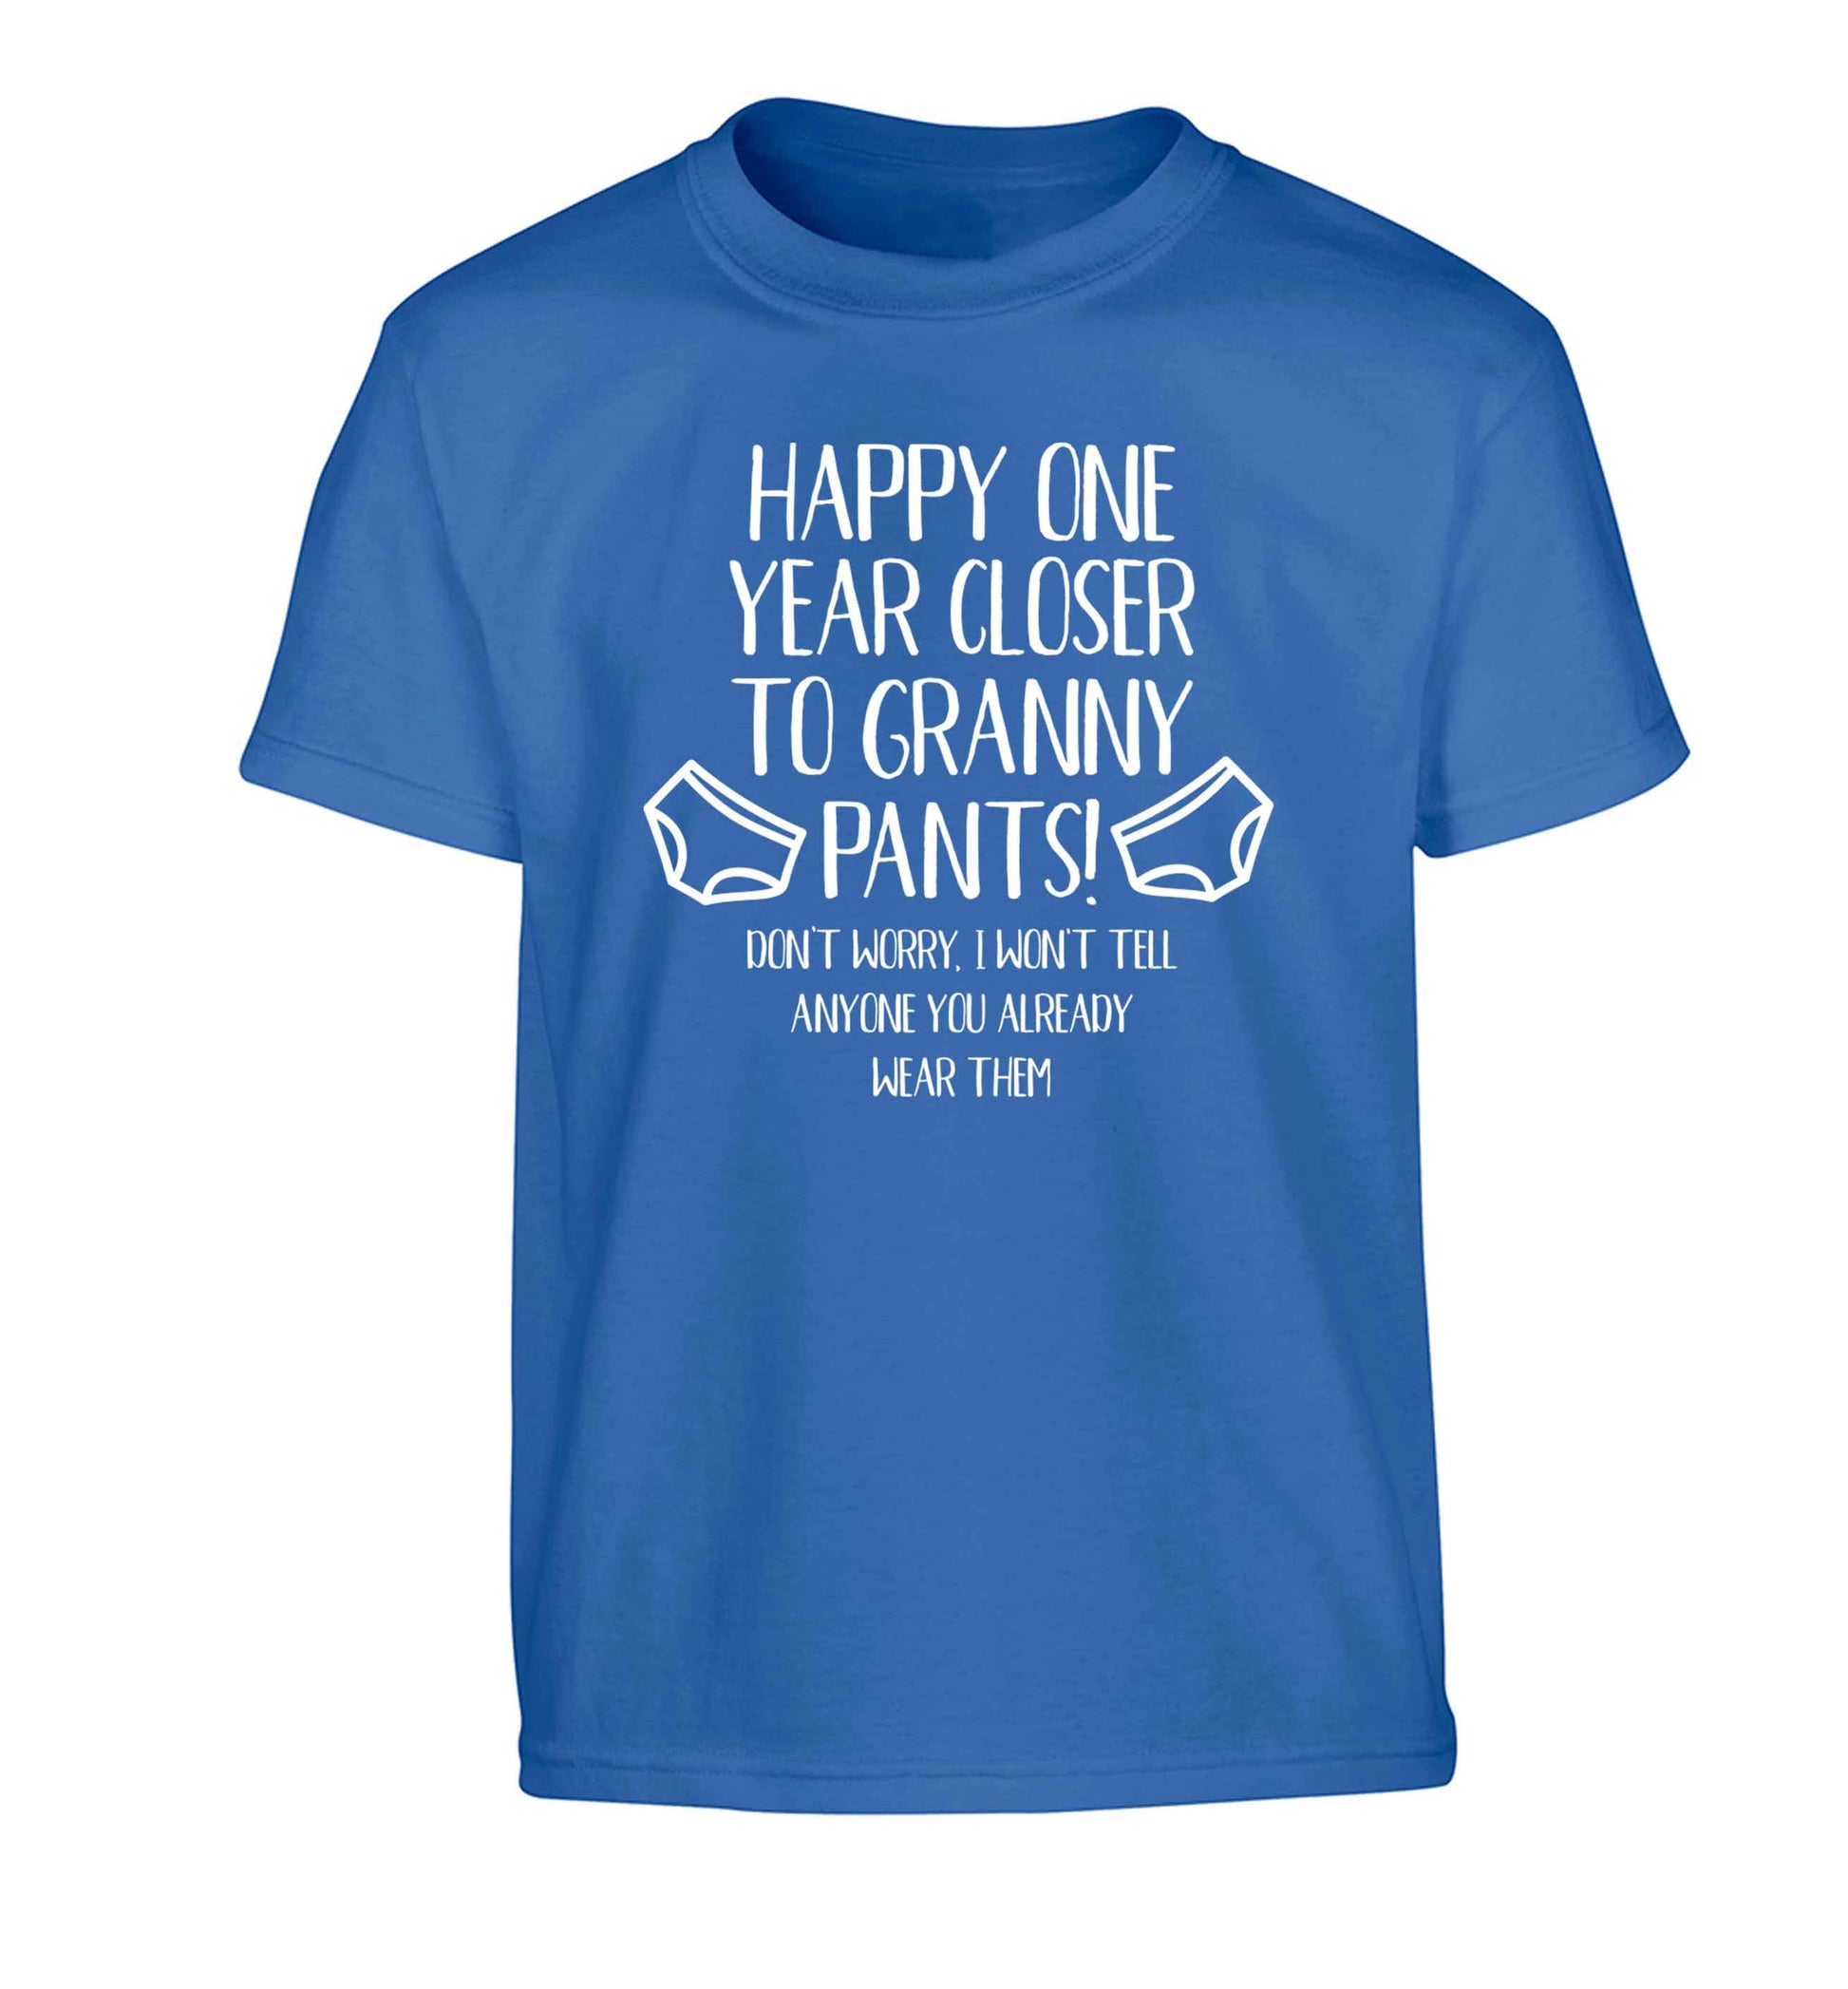 Happy one year closer to granny pants Children's blue Tshirt 12-13 Years